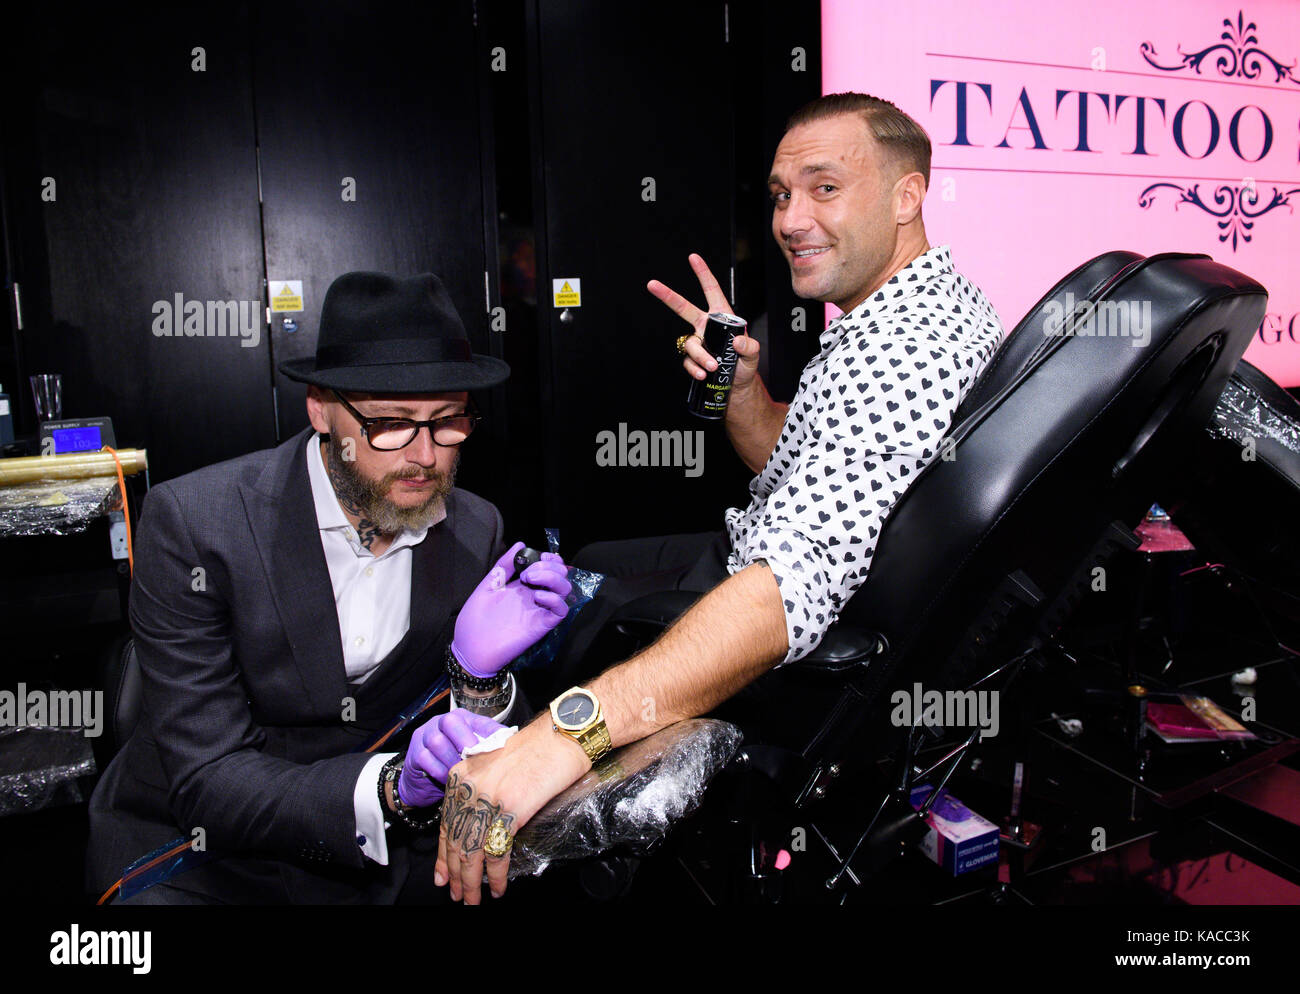 Ann Summers launches their new Oxford street store Featuring: Calum Best  get at Tattoo Where: London, United Kingdom When: 25 Aug 2017 Credit:   Stock Photo - Alamy